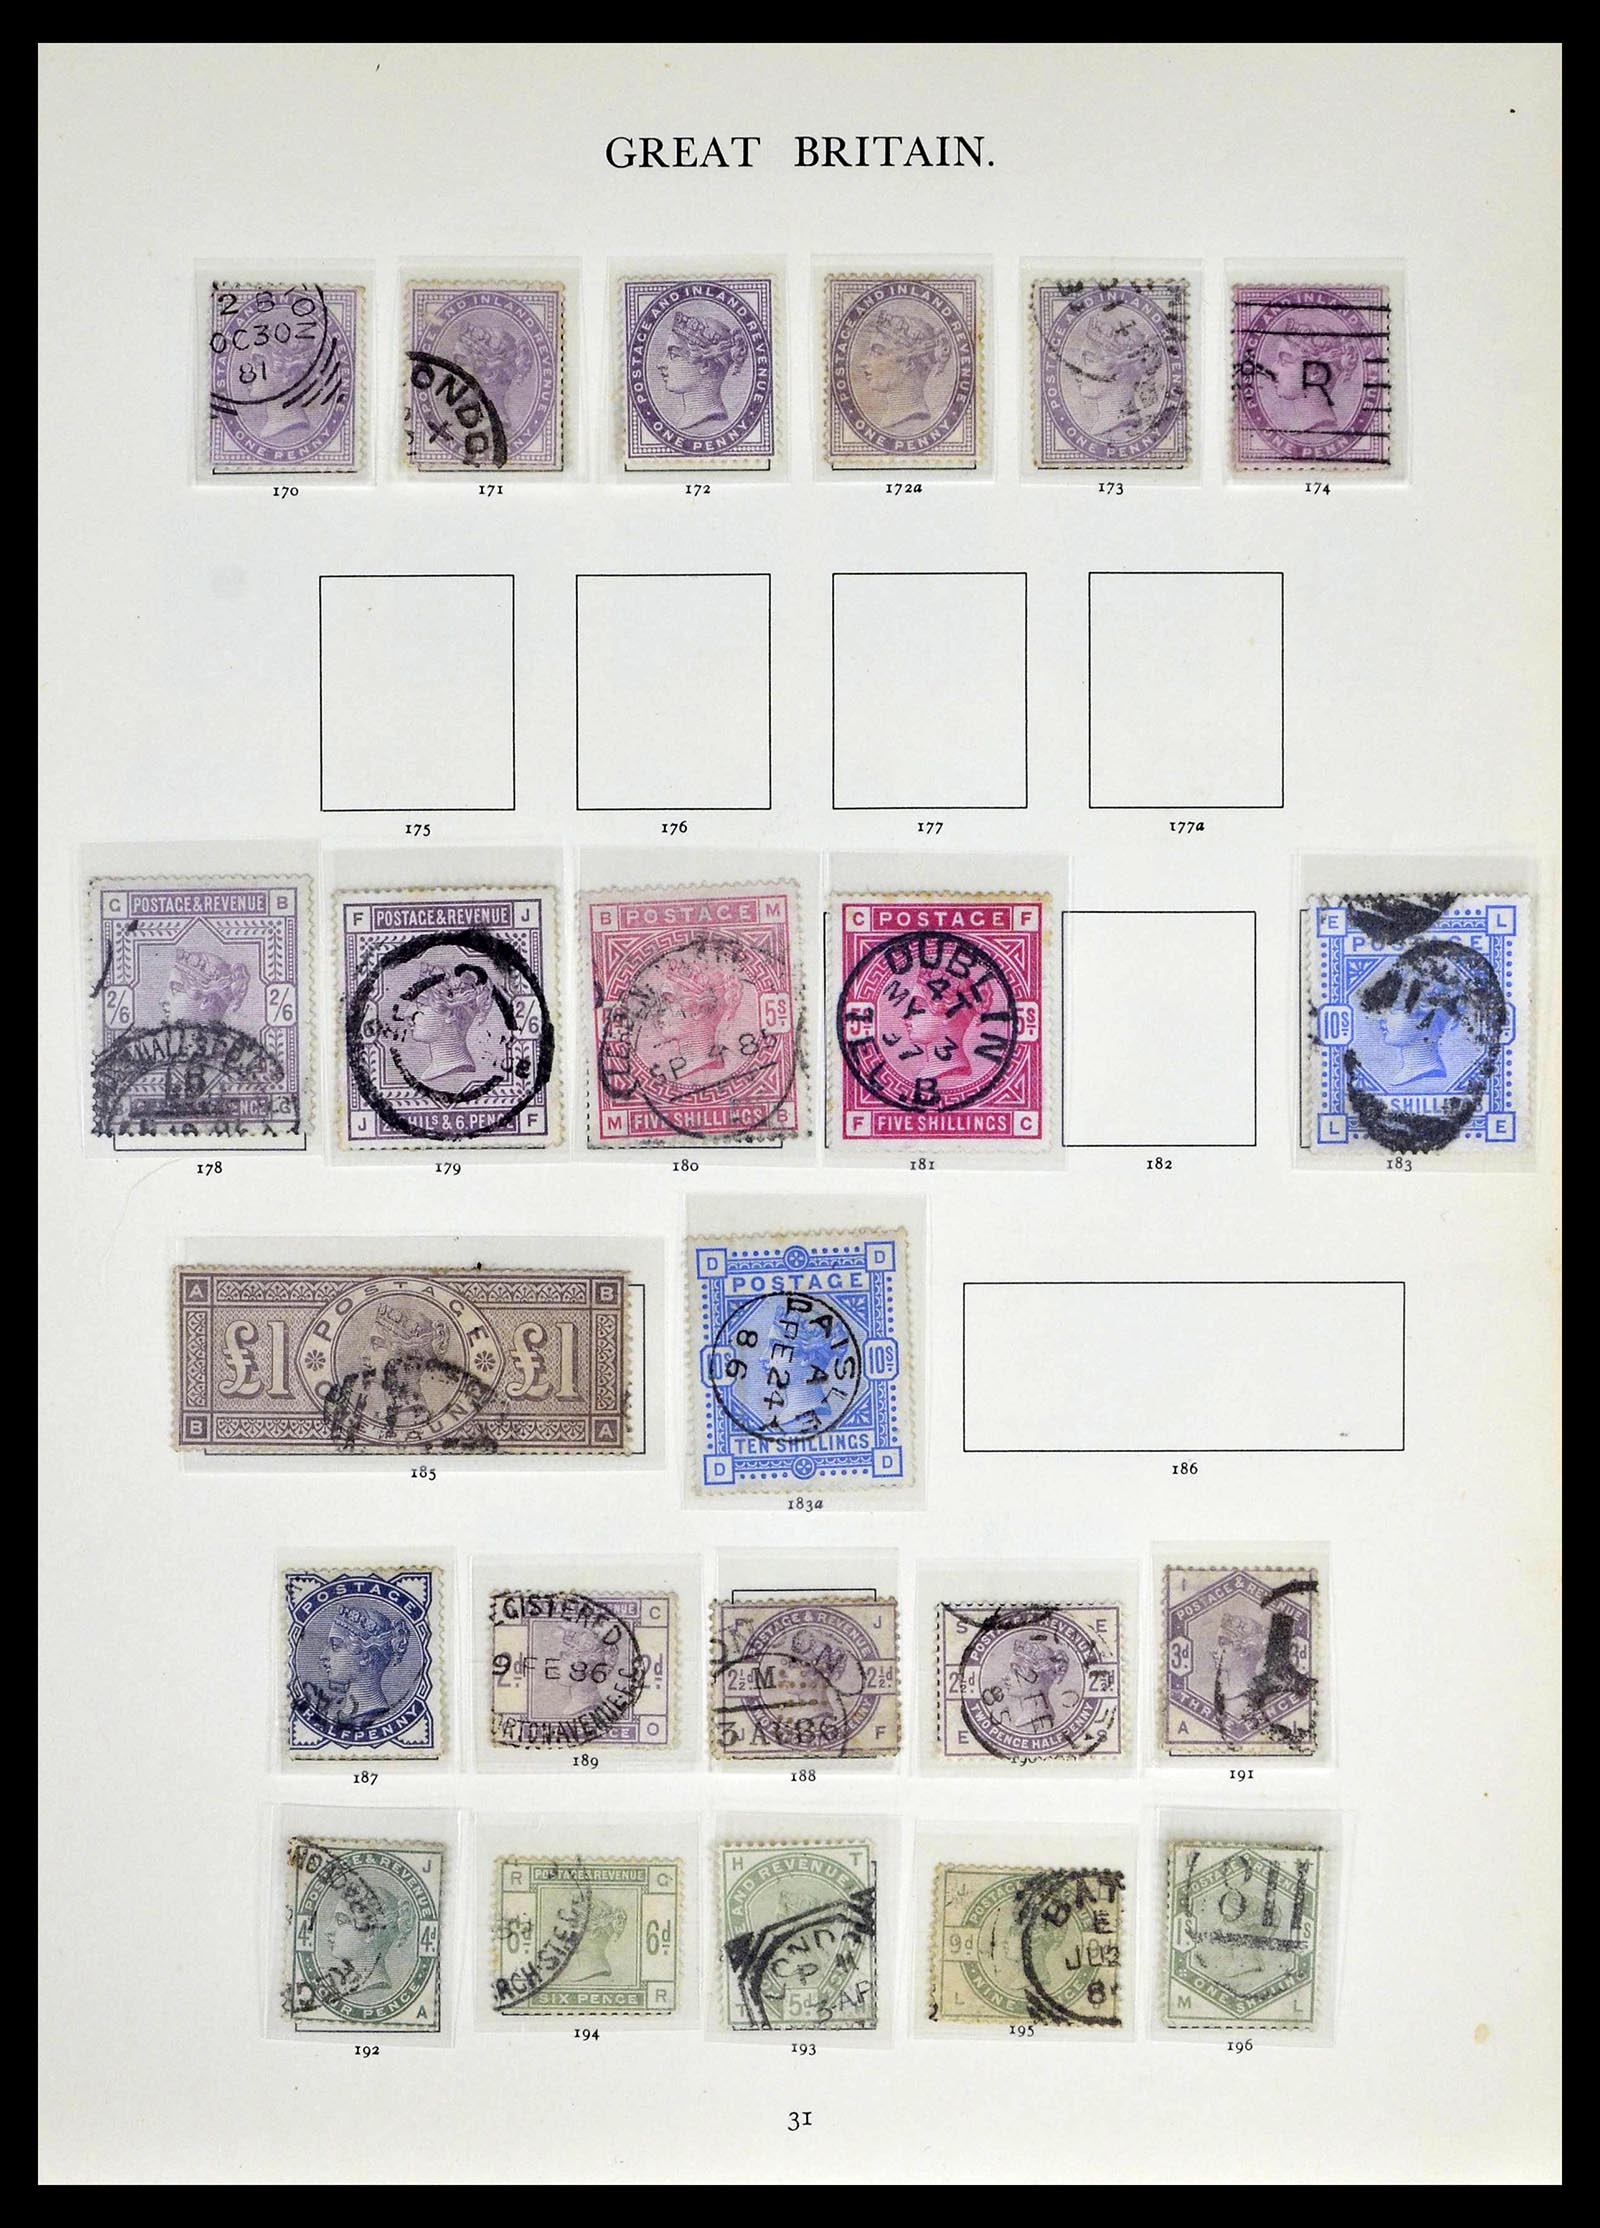 39025 0012 - Stamp collection 39025 Great Britain specialised 1840-1990.